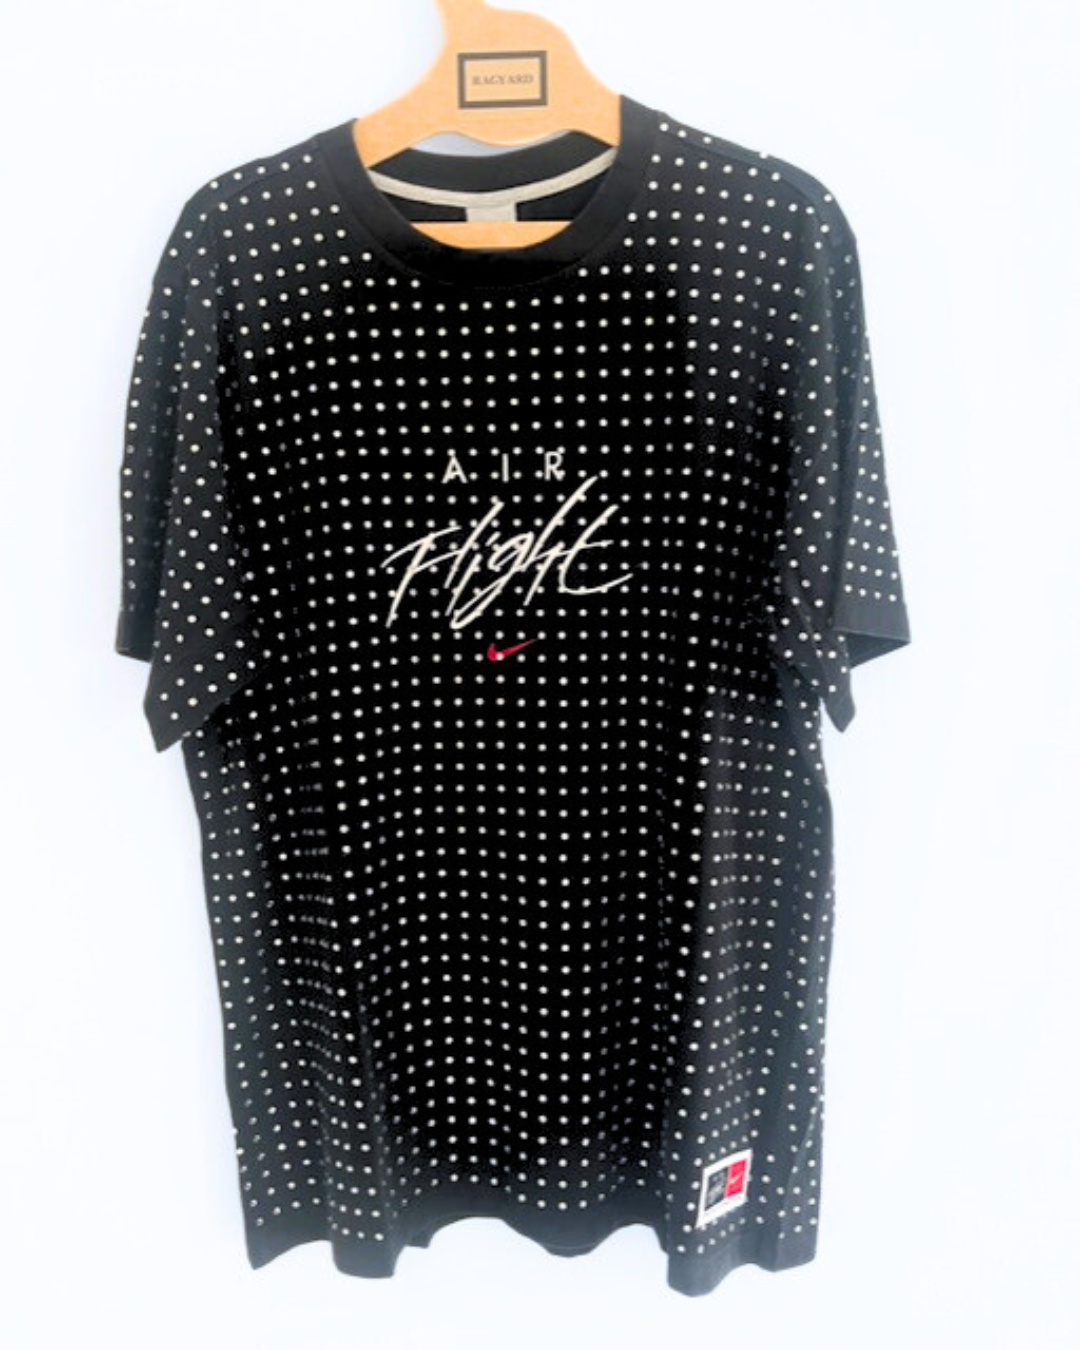 Vintage Black NIKE FLIGHT T-shirt with all over diamante studs